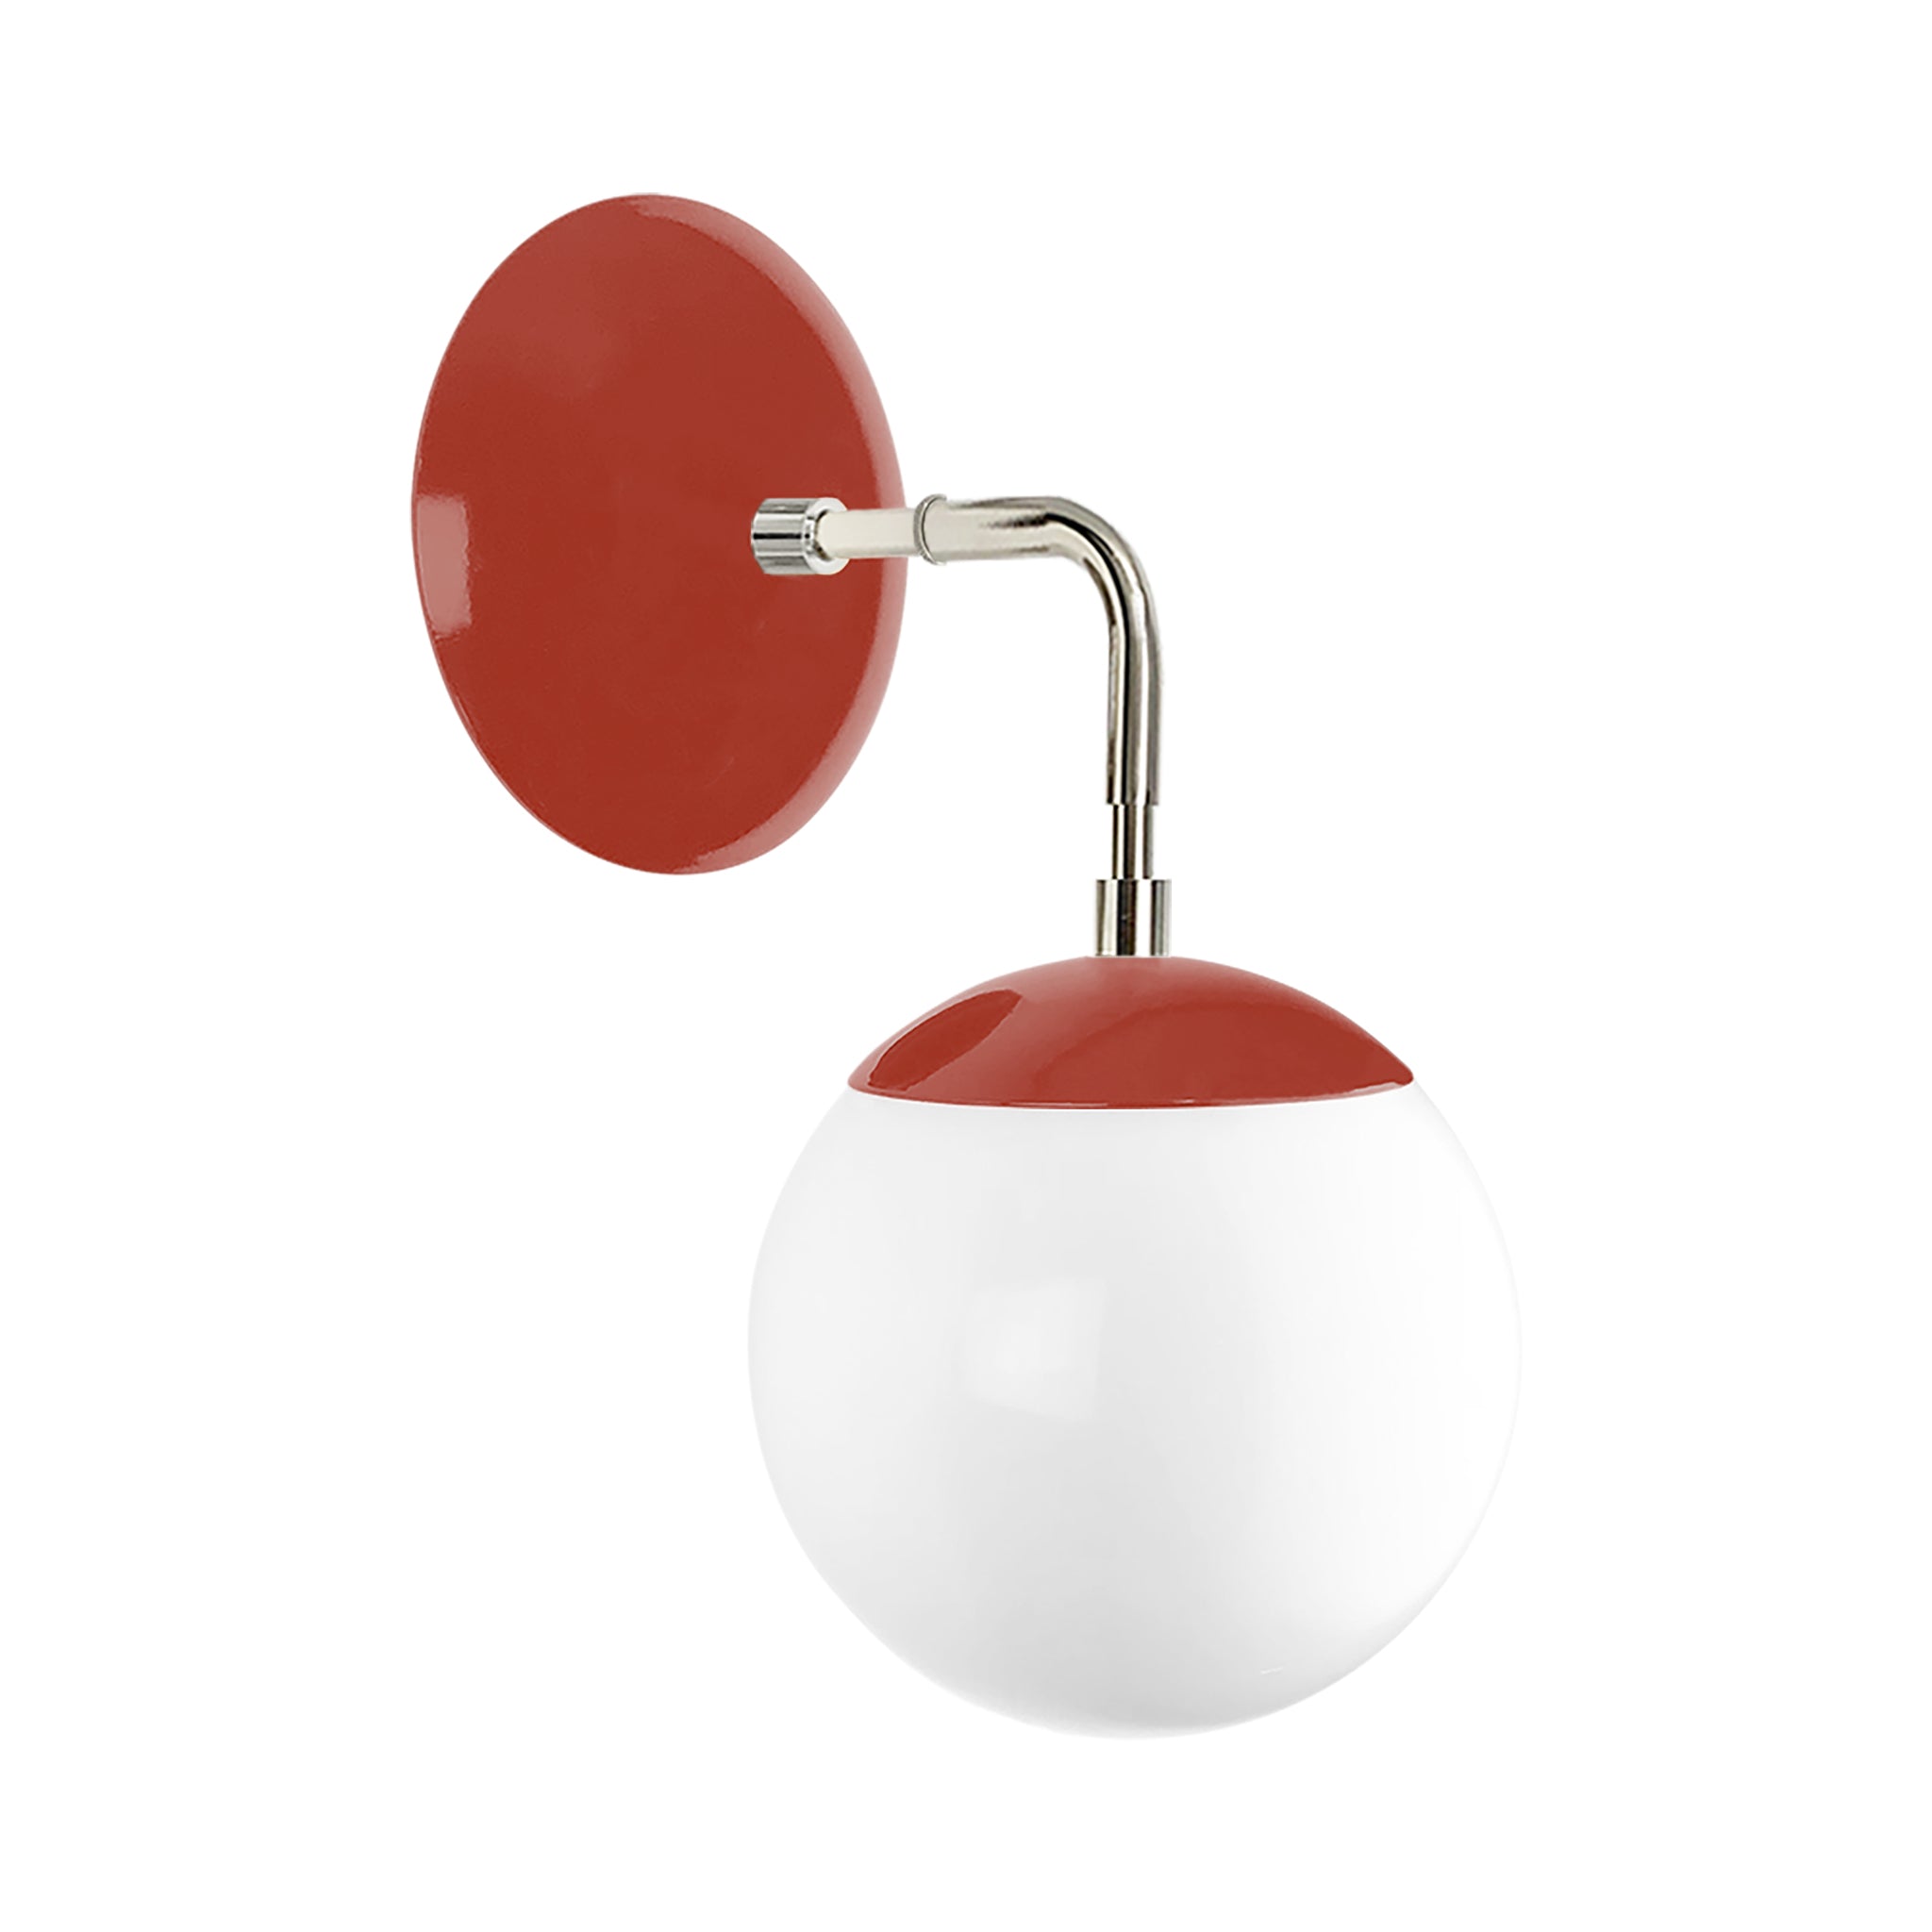 Nickel and riding hood red color Cap sconce 6" Dutton Brown lighting